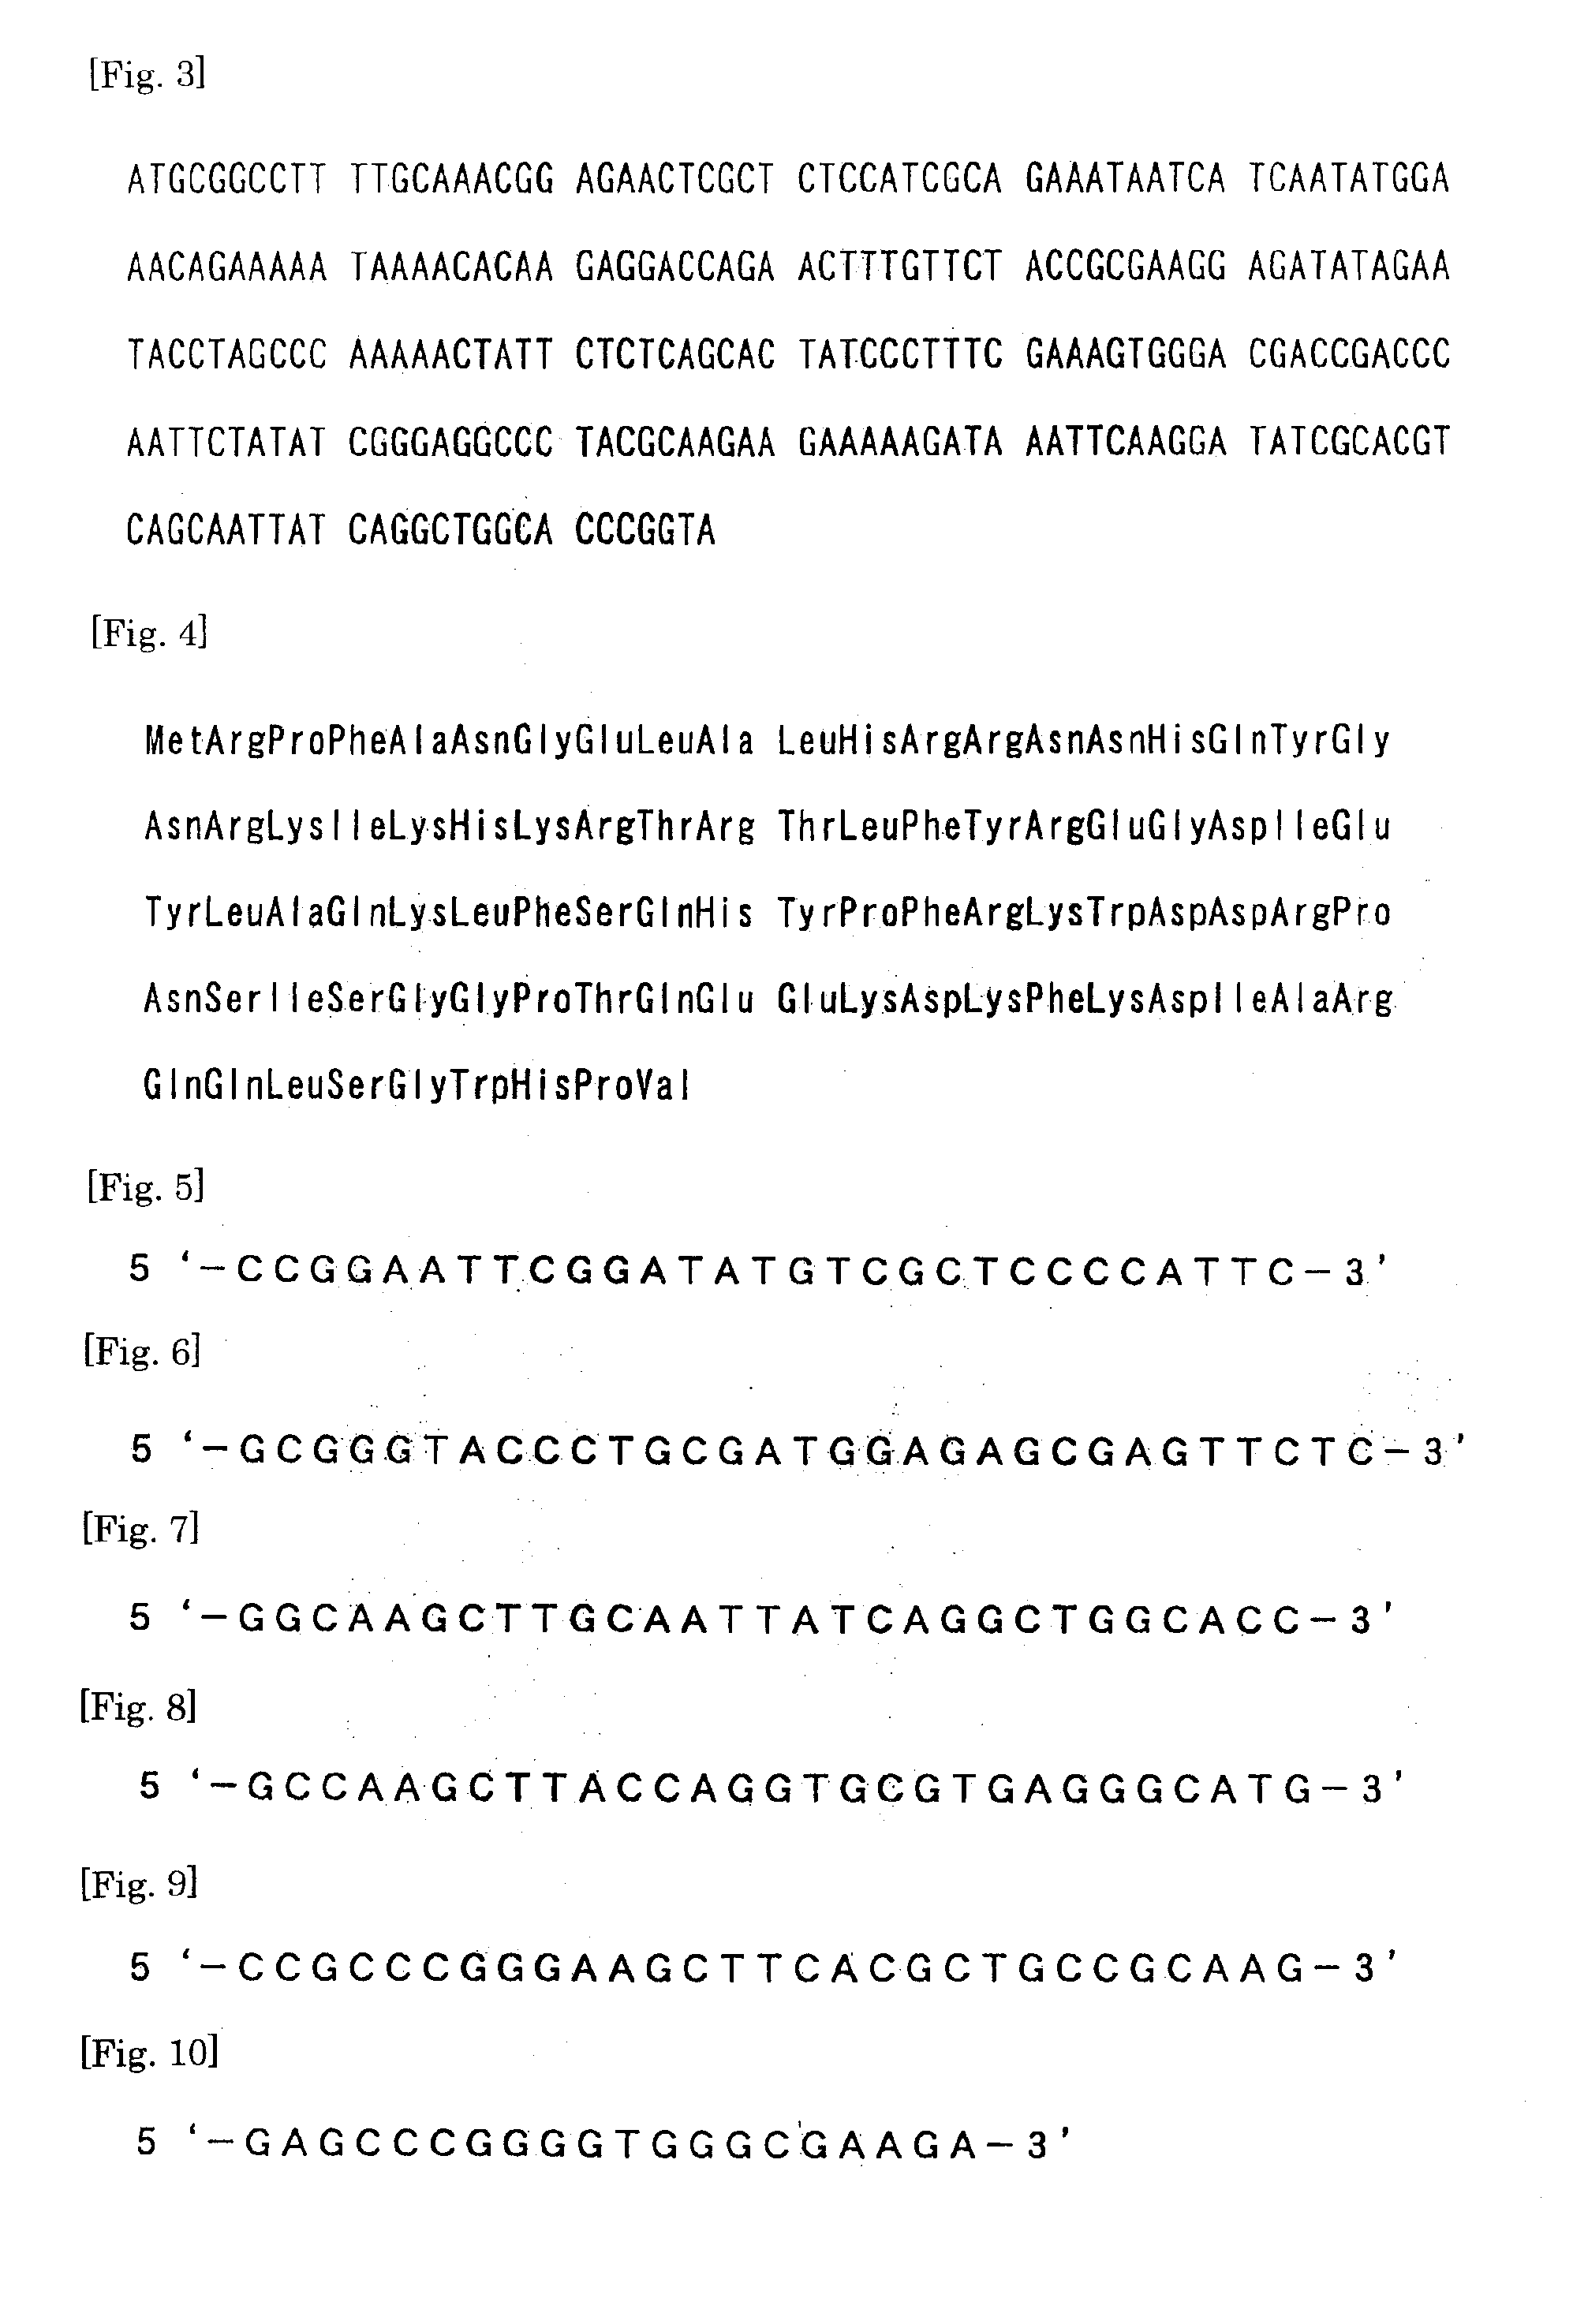 Gene associated with foam formation of acetic acid bacterium, acetic acid bacterium bred by modifying the gene and method for producing vinegar using the acetic acid bacterium